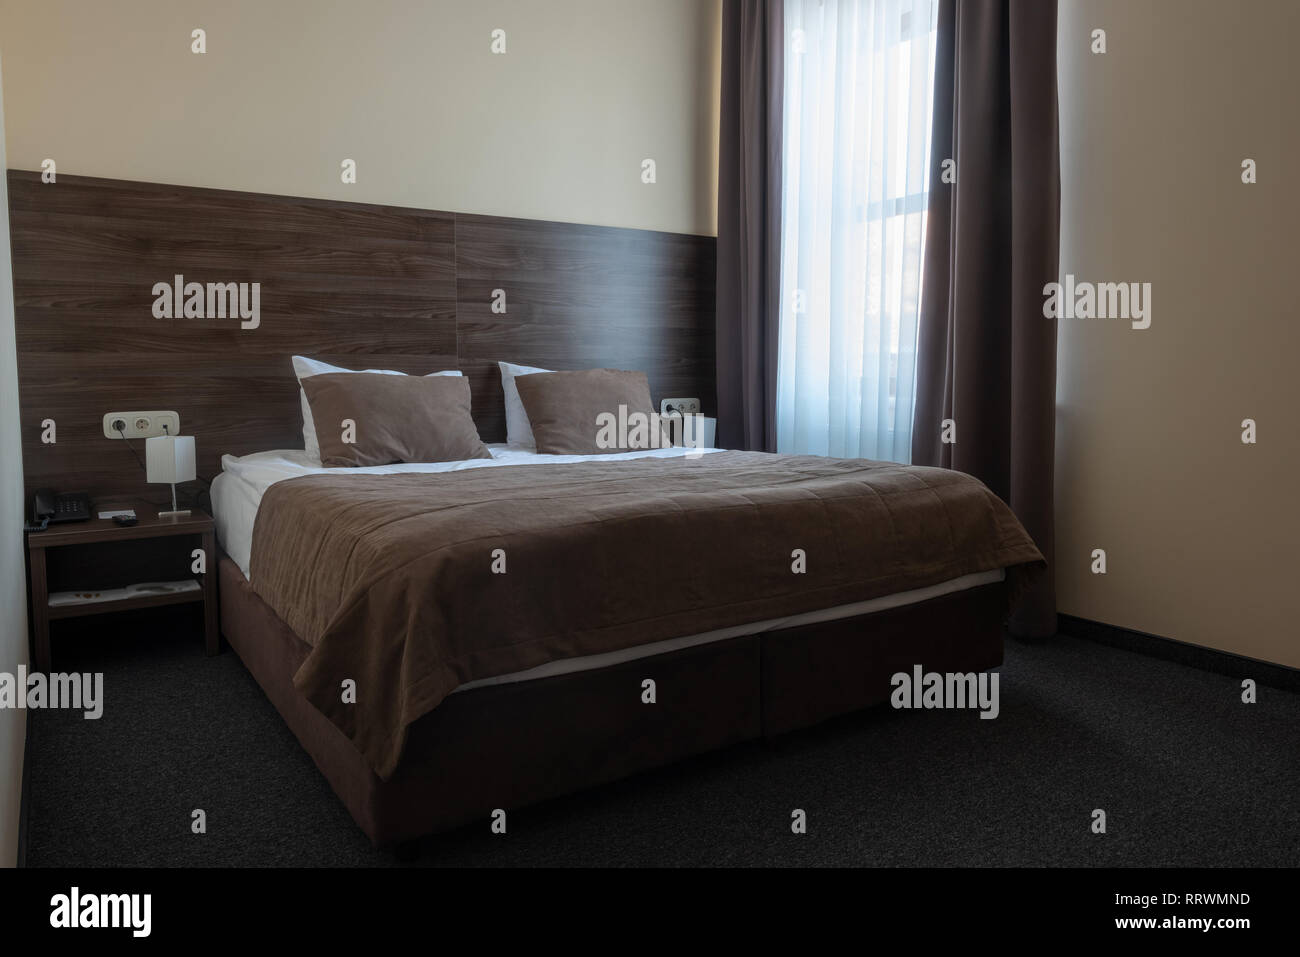 hotel room interior with window and brown bed Stock Photo